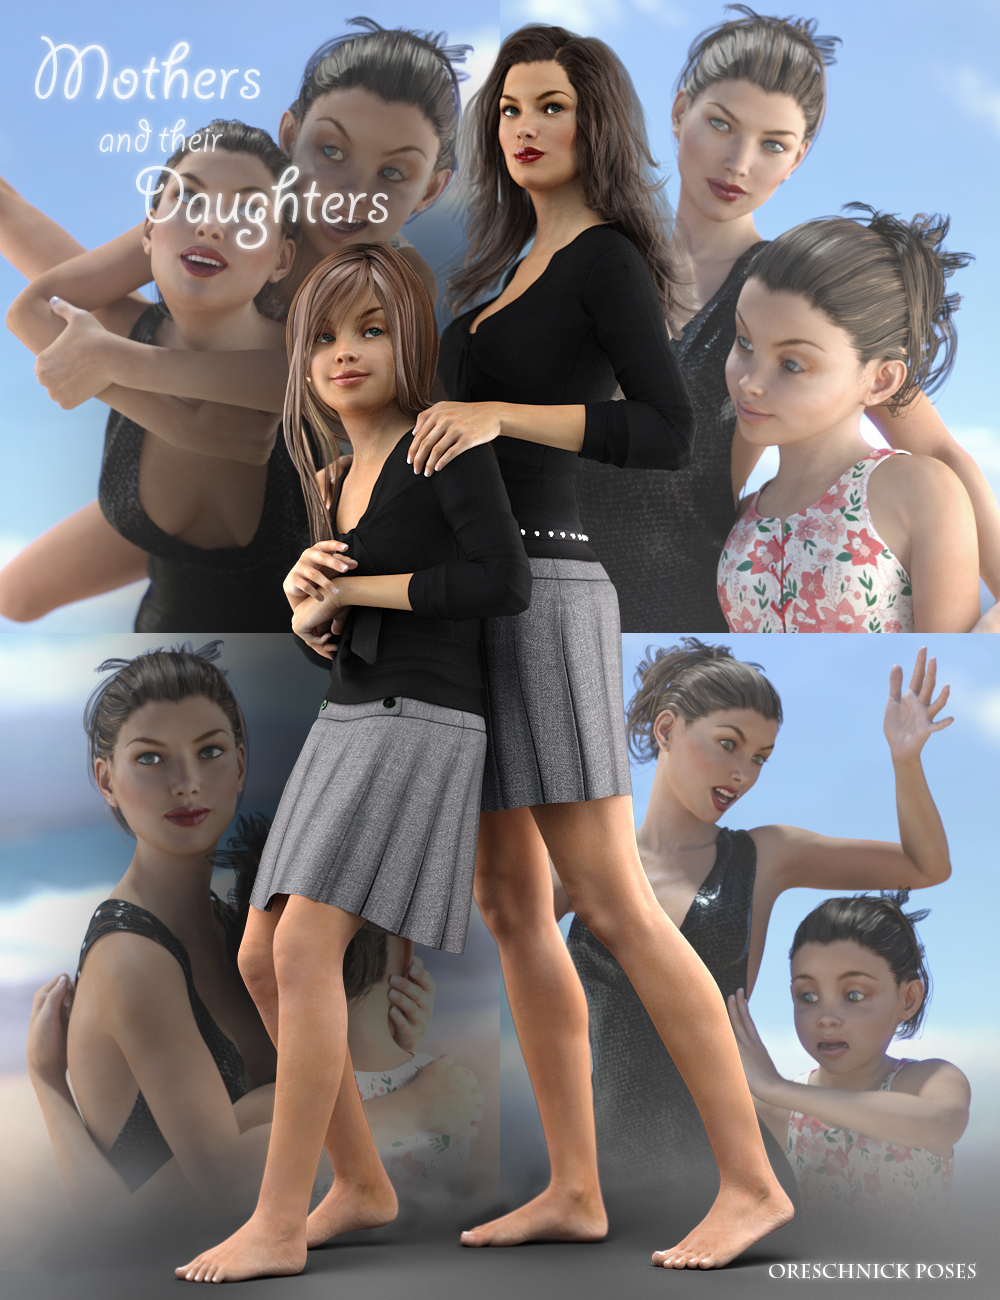 Oreschnick Poses: Mothers and their Daughters Poses by: Devon, 3D Models by Daz 3D